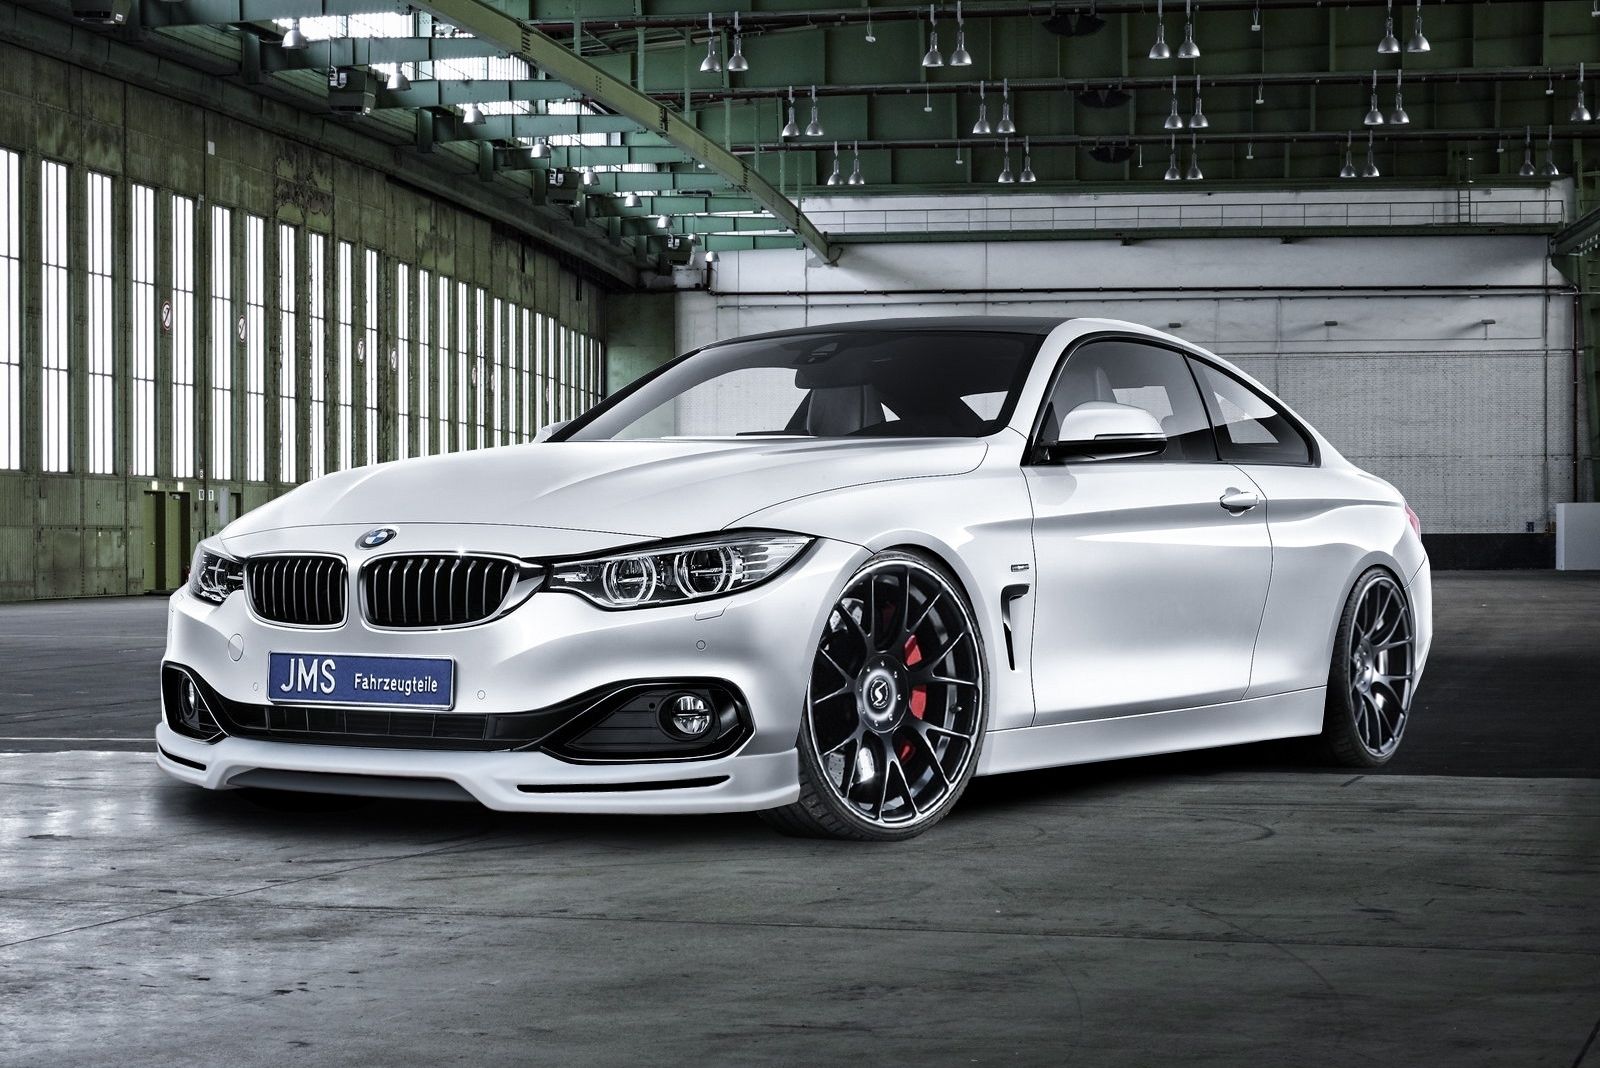 BMW 4 Series Coupe By JMS Picture, Photo, Wallpaper. Top